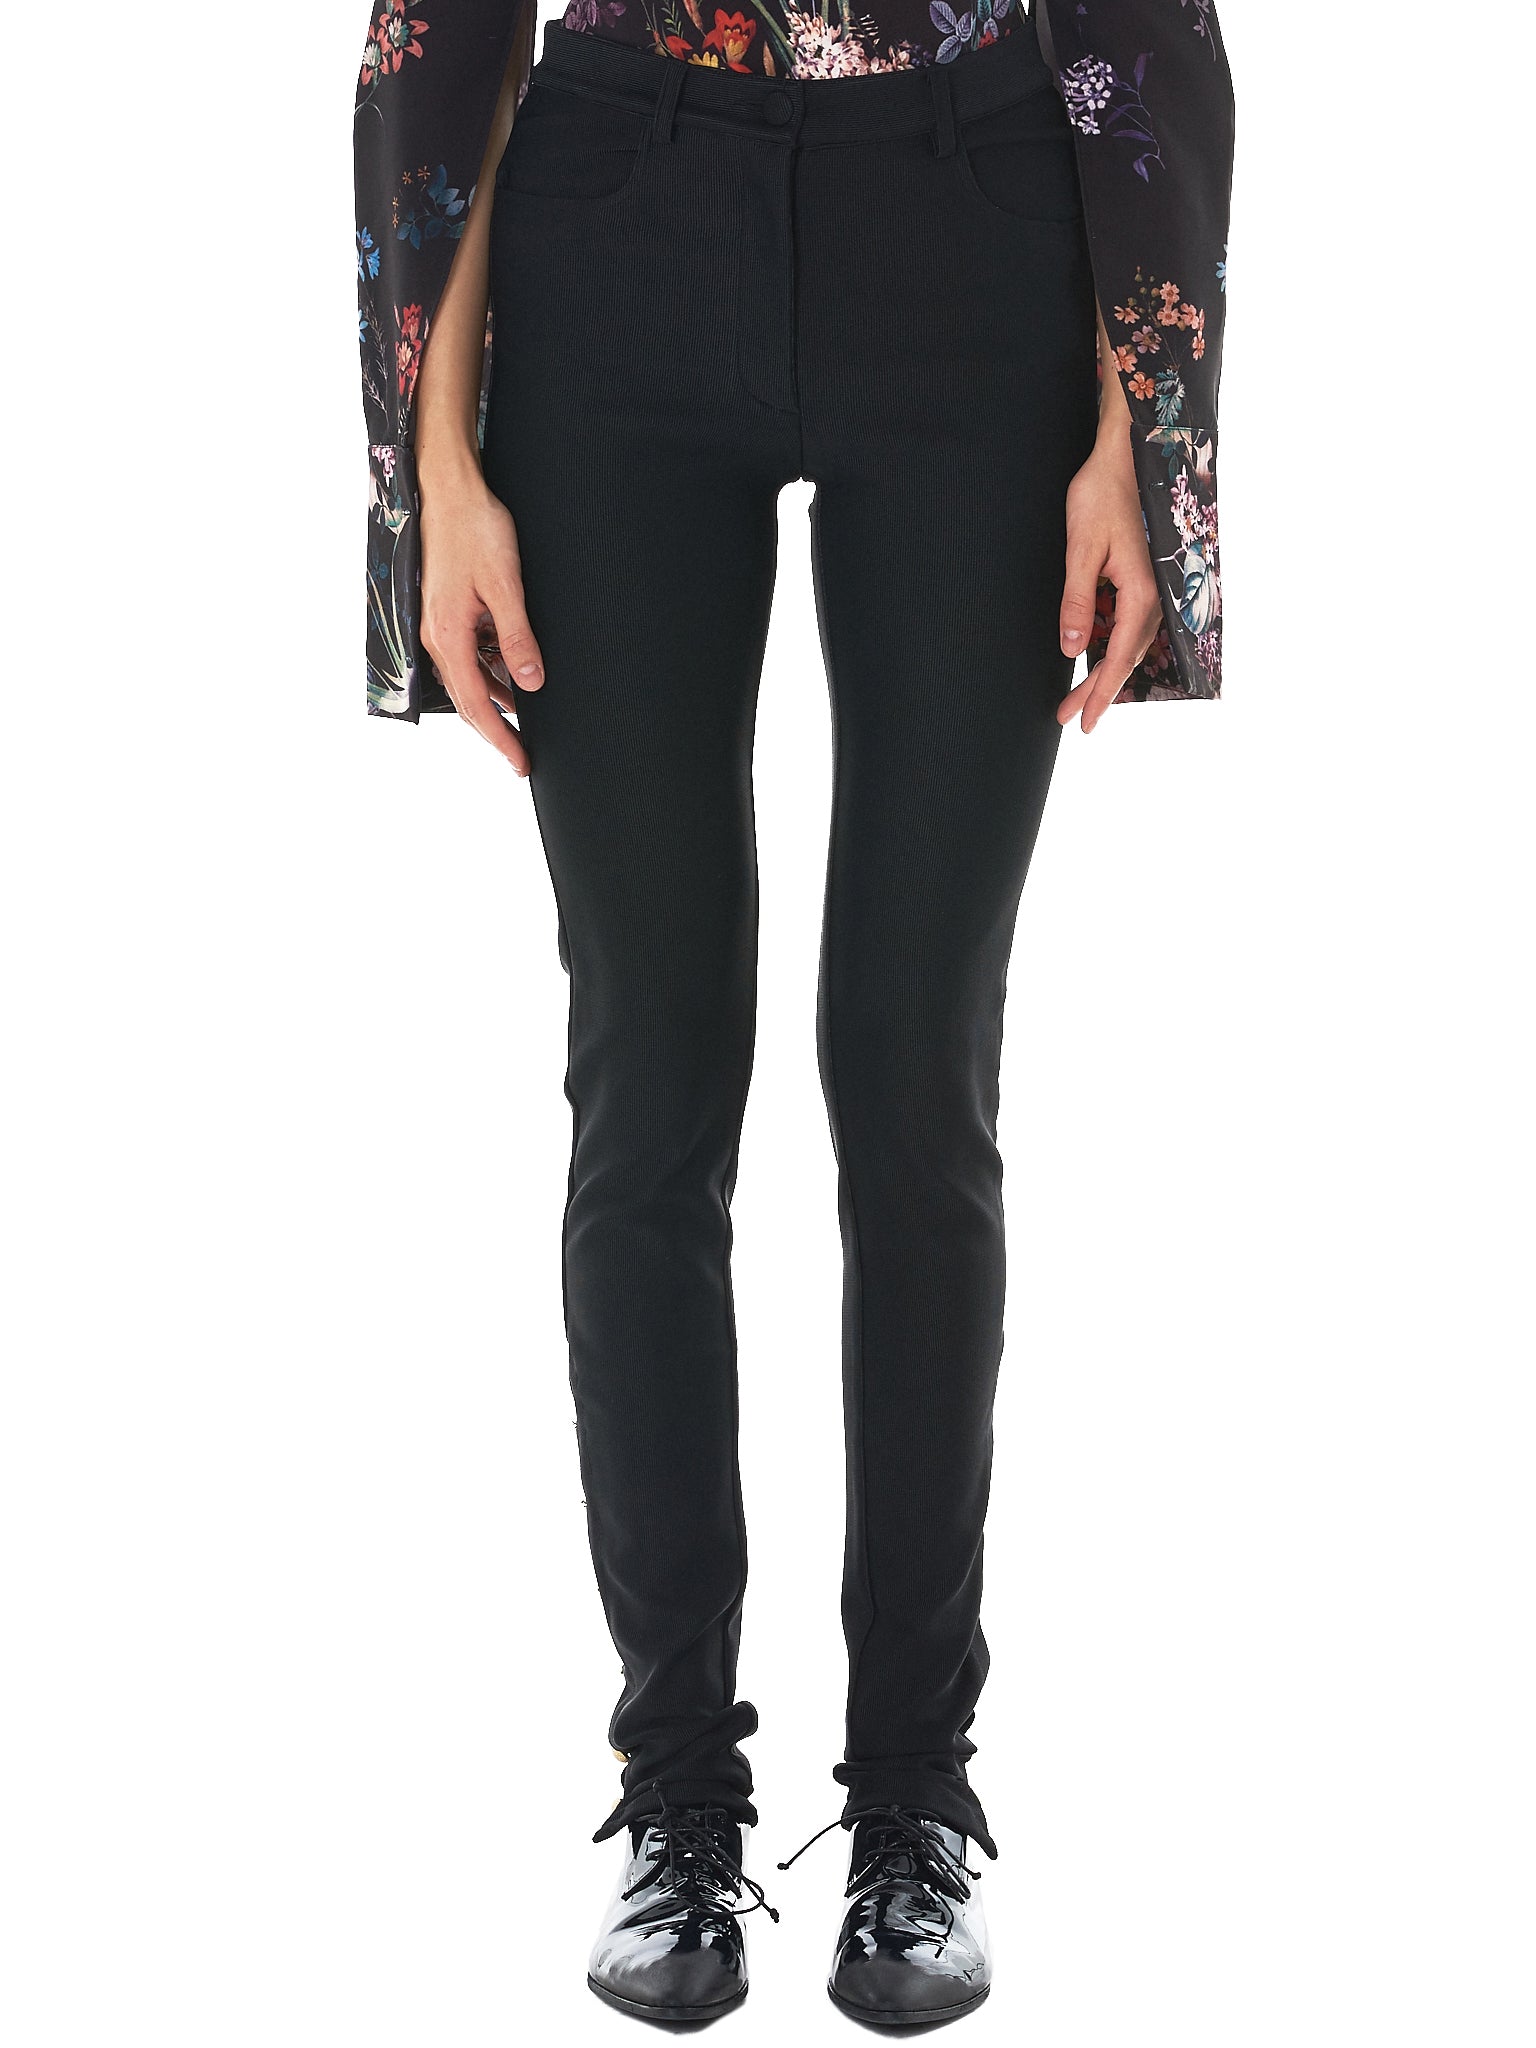 Fitted Stretch Trousers (PA13200-BLACK)